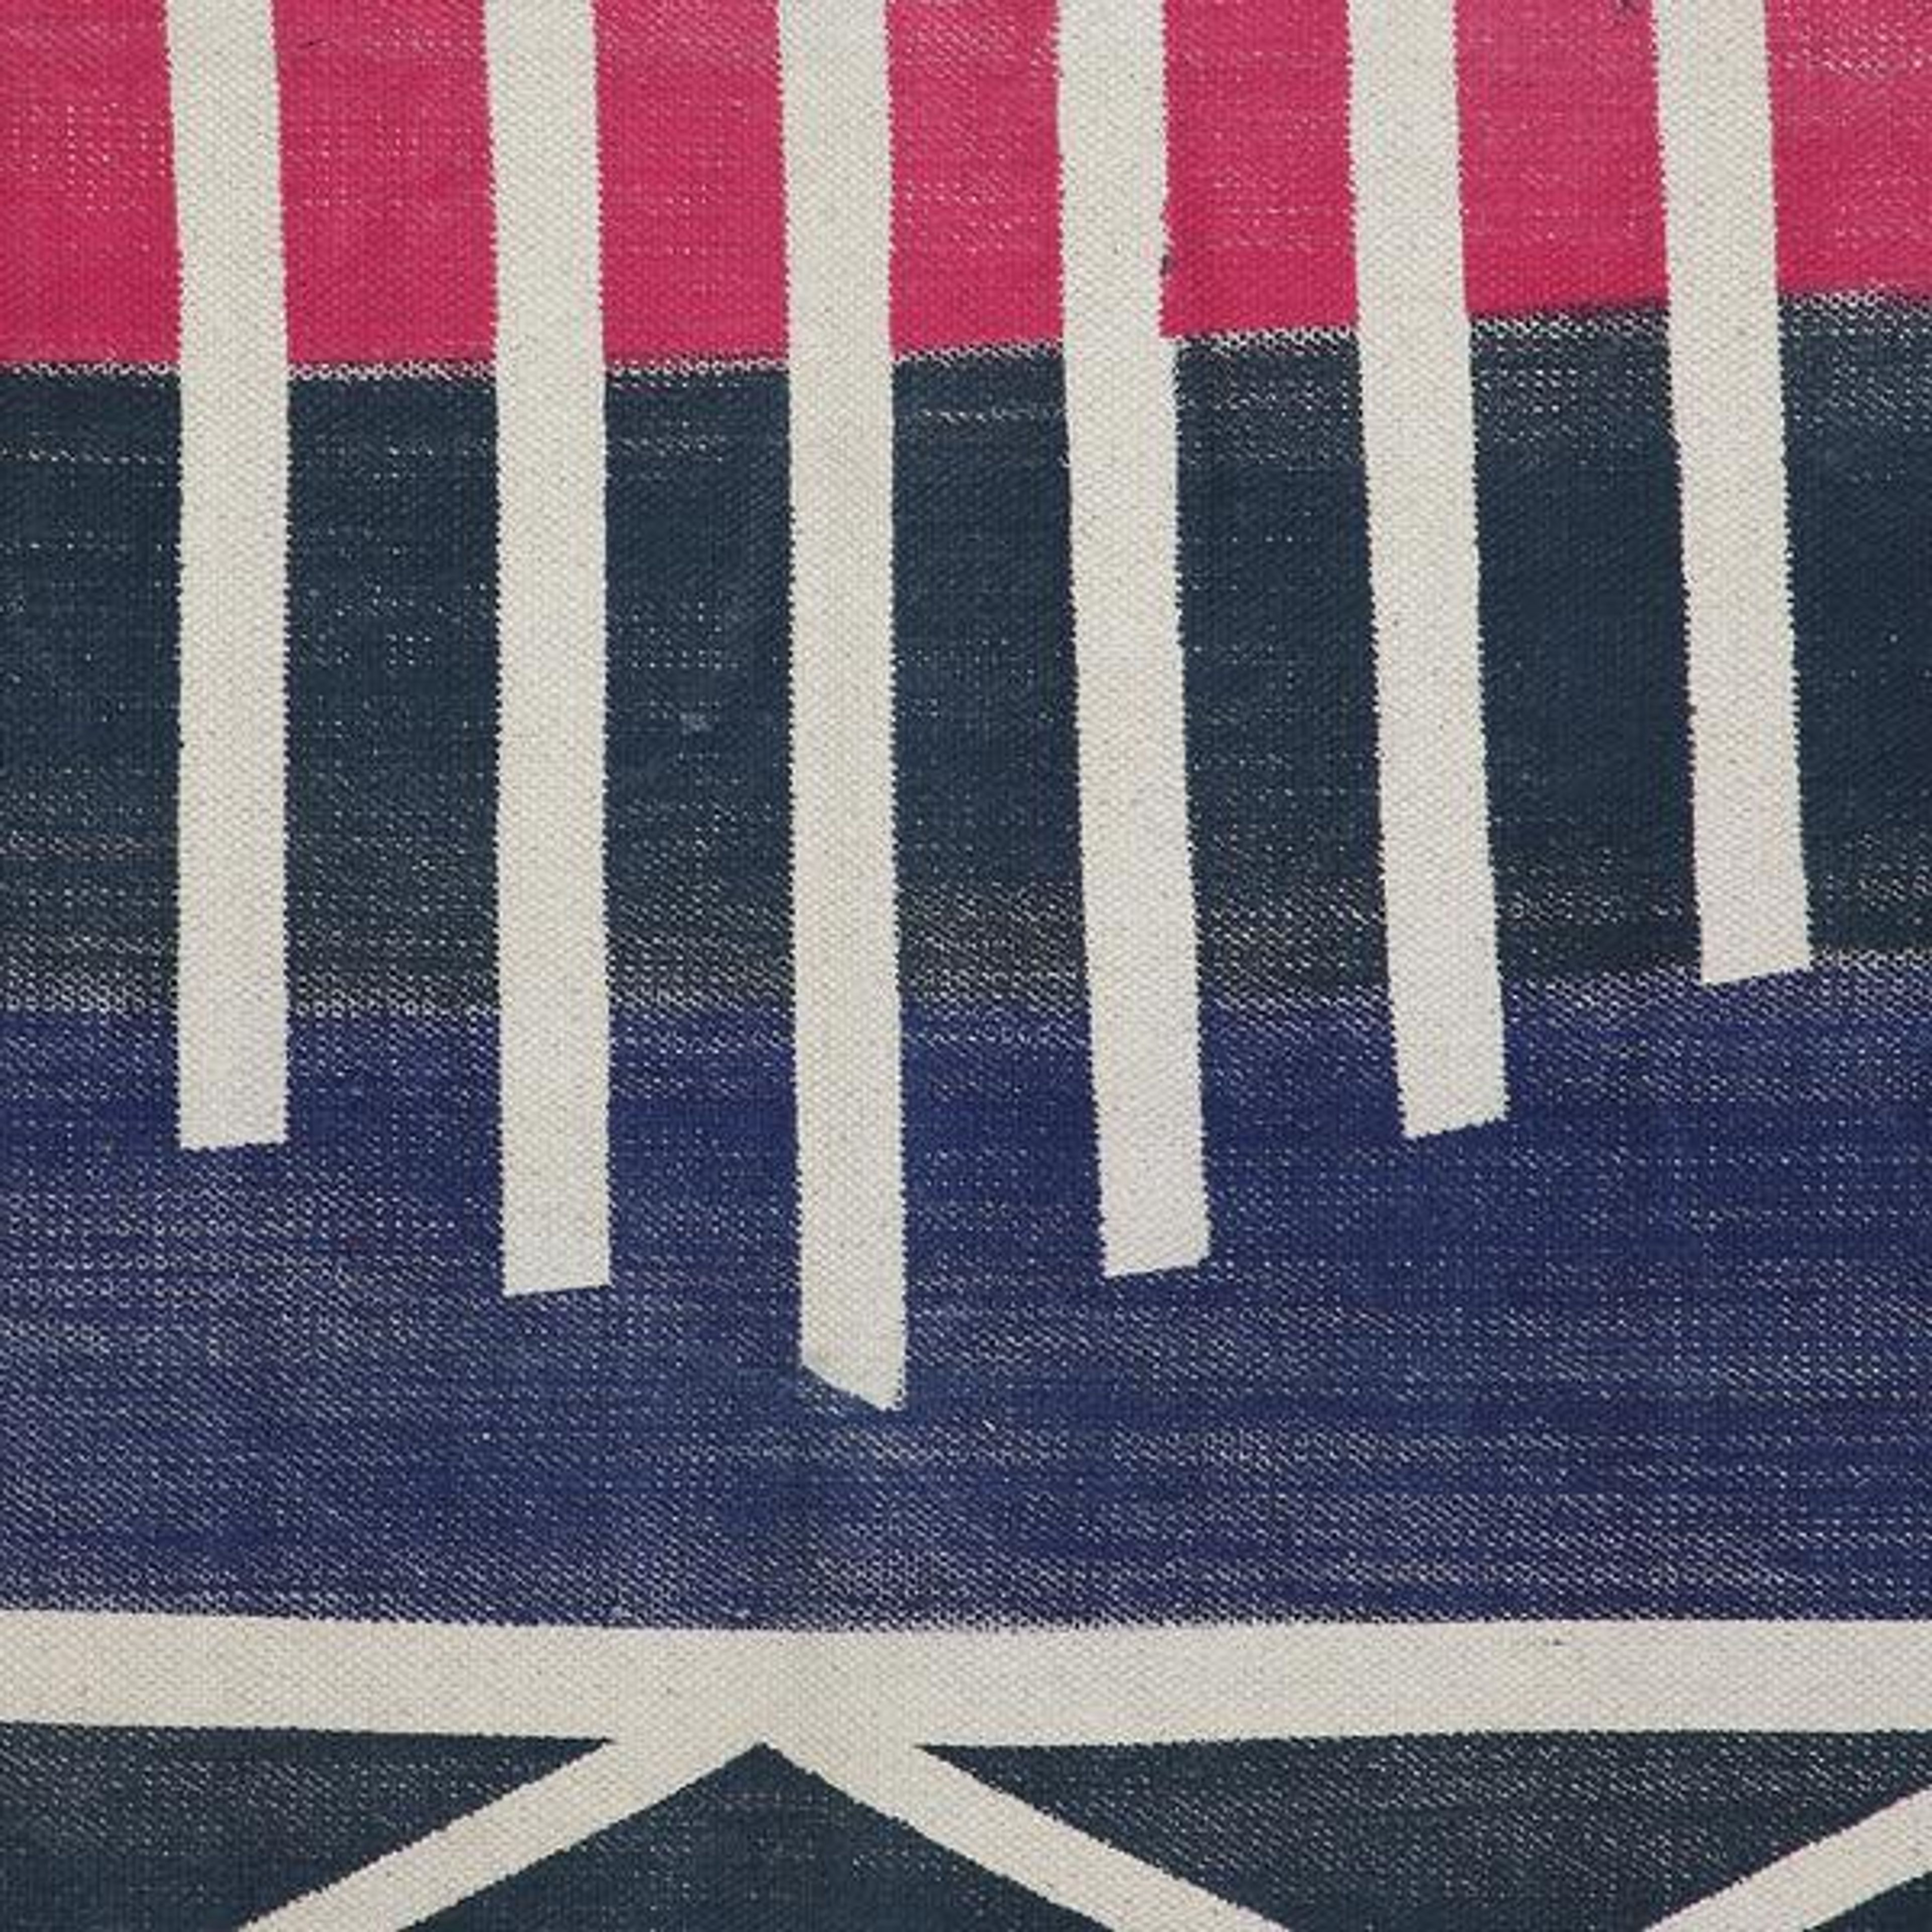 Navy Blue with Natural Stripes Printed Rug - 36x60 inch